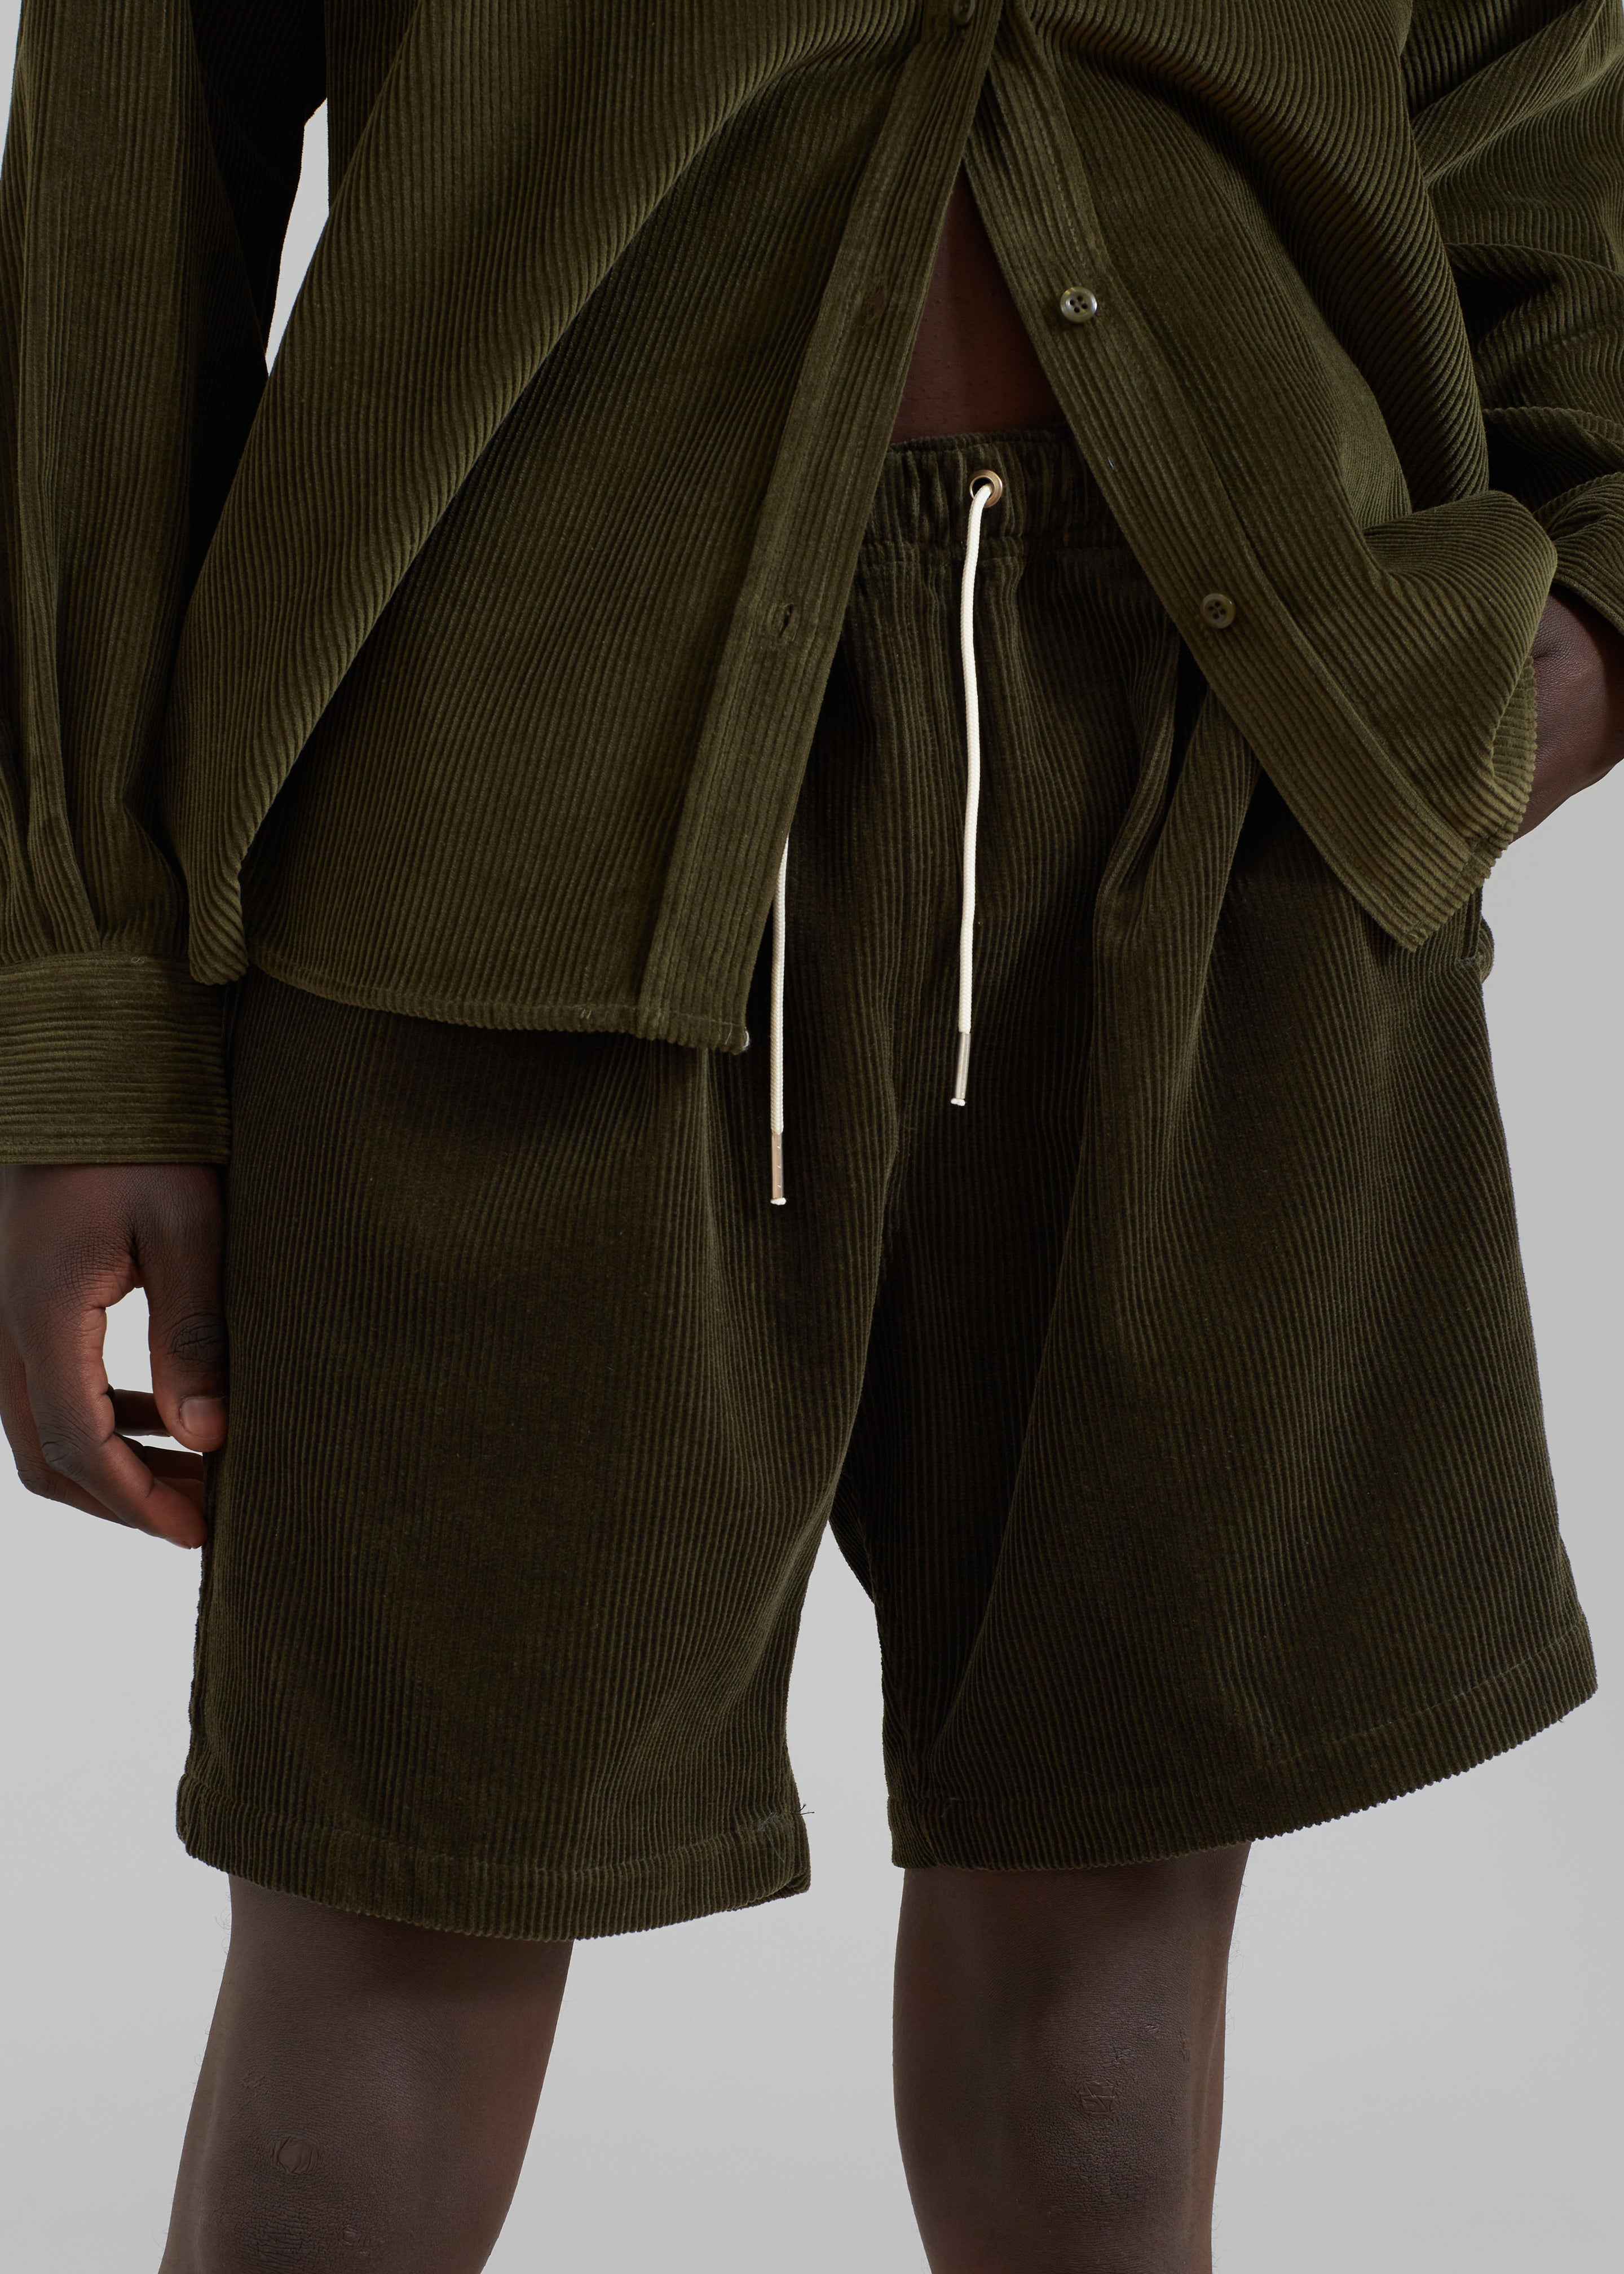 SUBCULTURE CORDUROY SHORTS OLIVE-